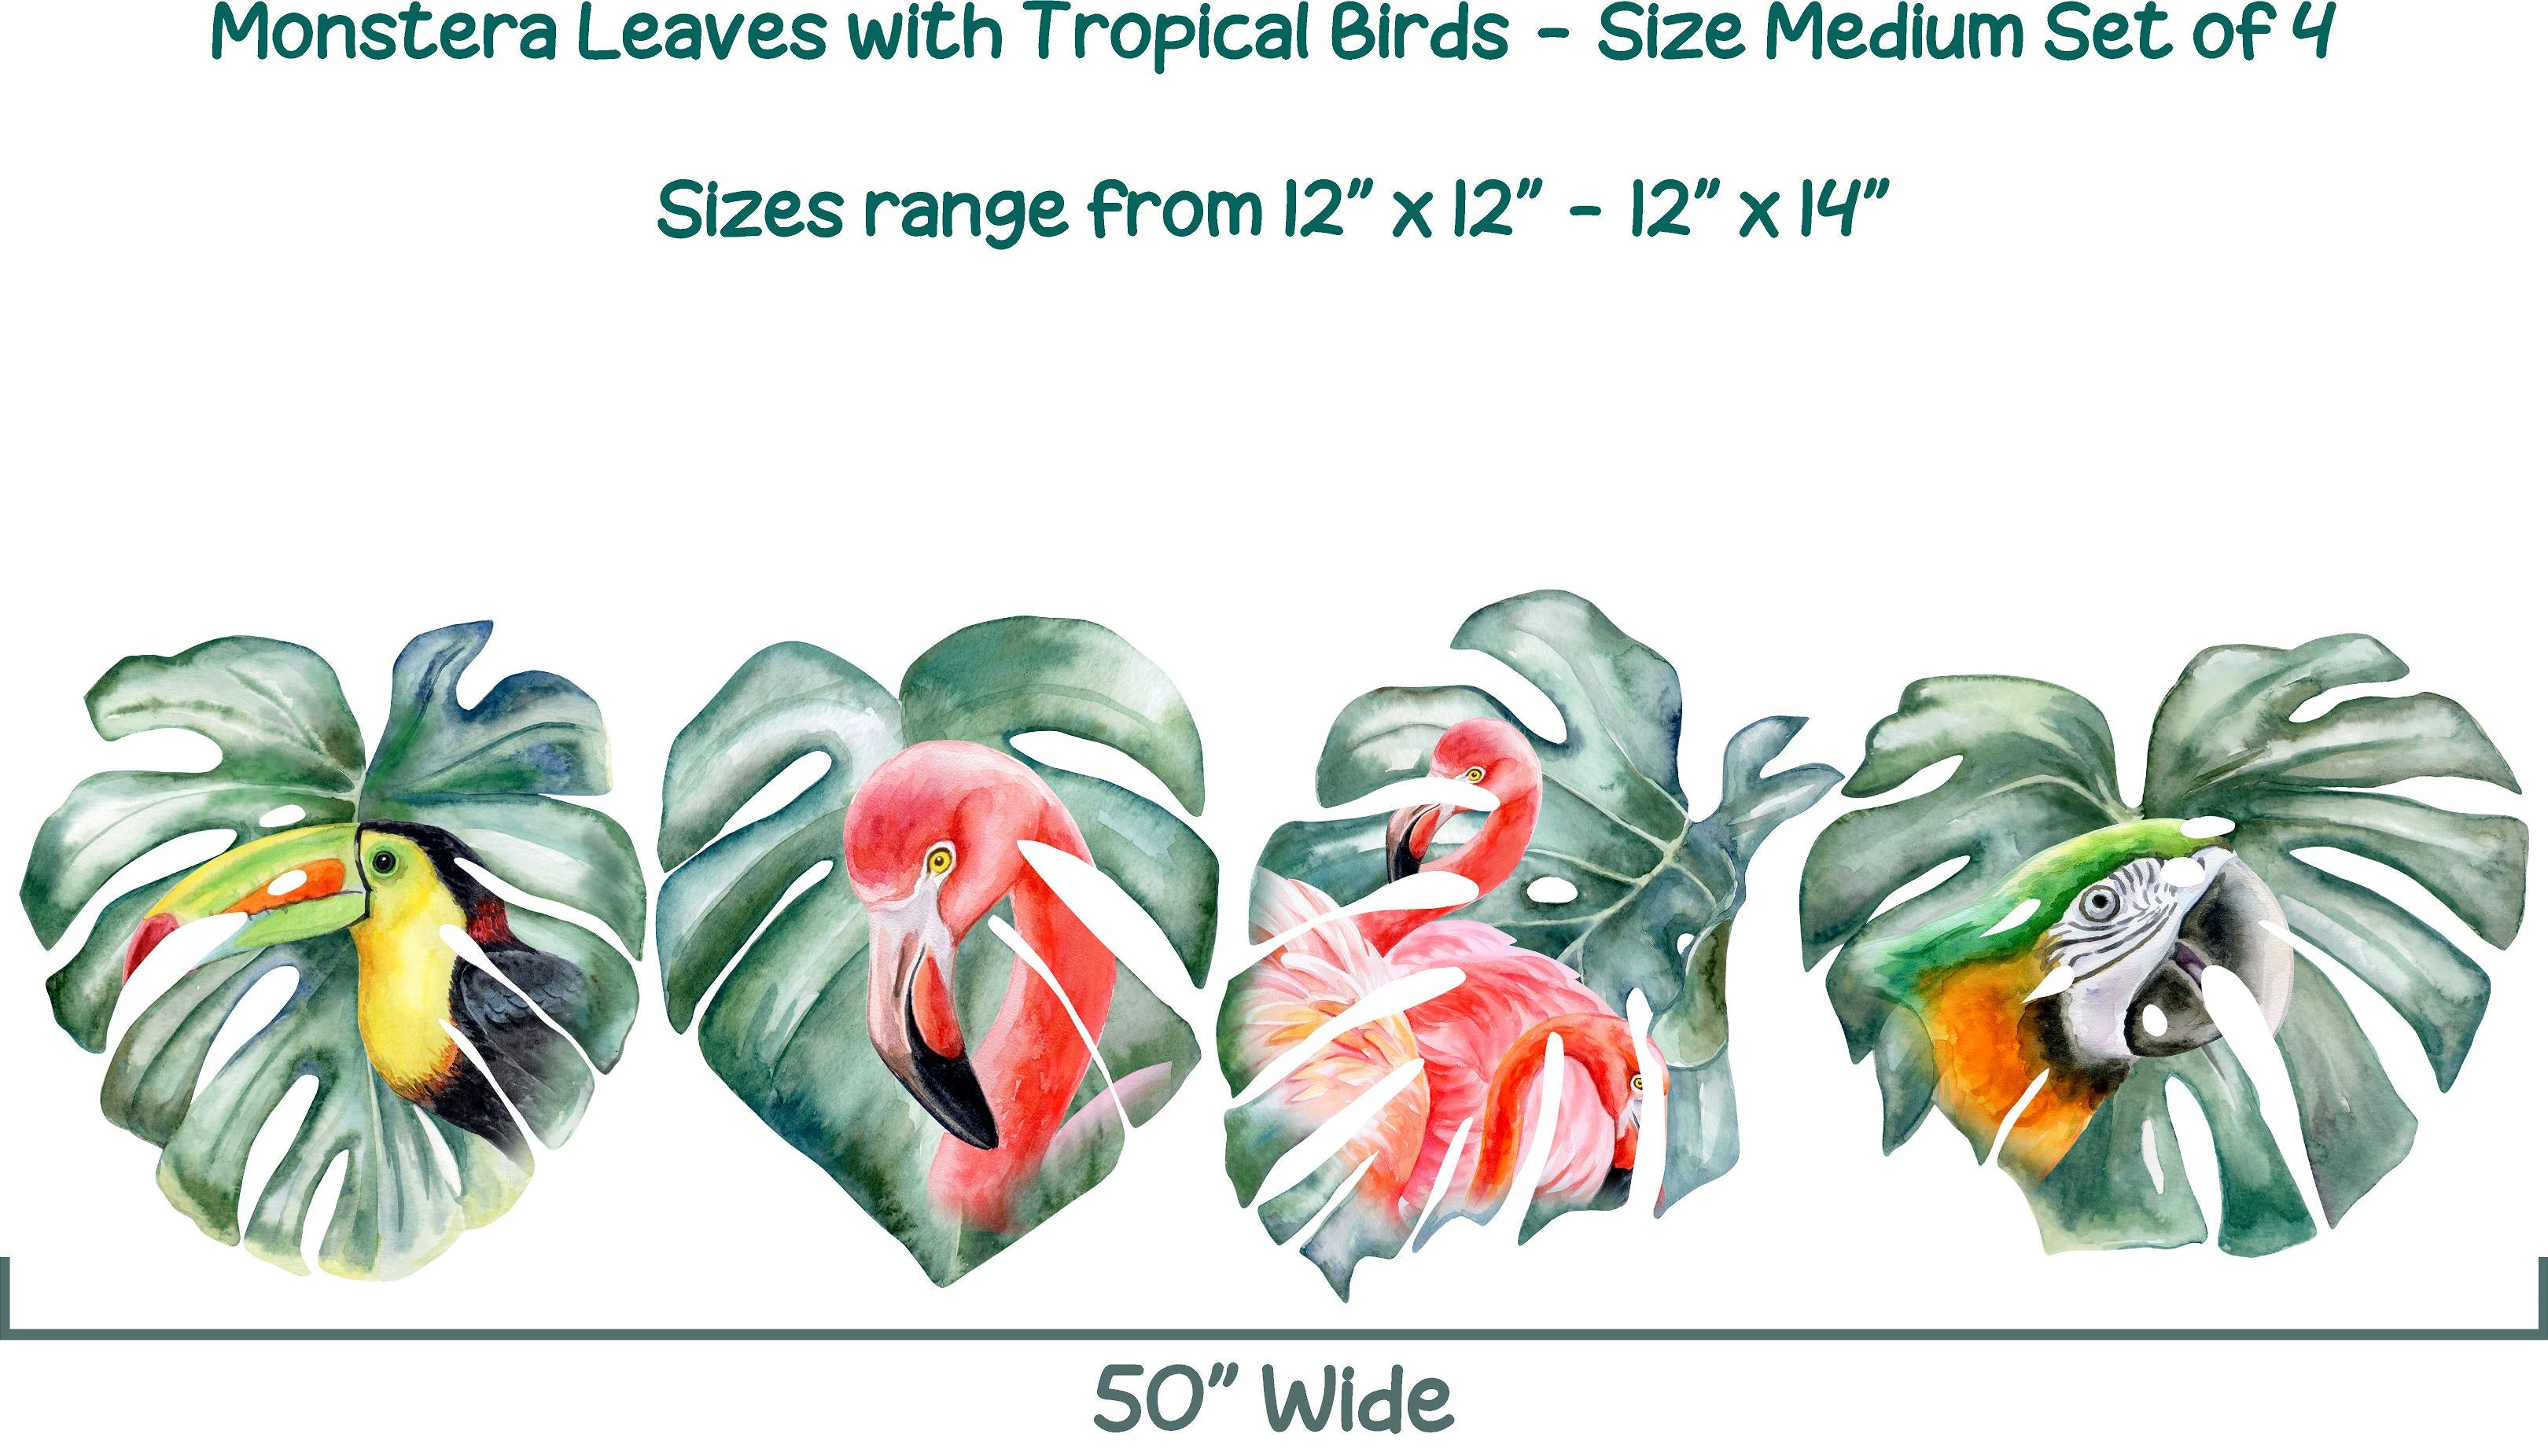 Monstera Leaves with Colorful Tropical Birds Wall Decal Set Safari MEDIUM Set of 4 | DecalBaby